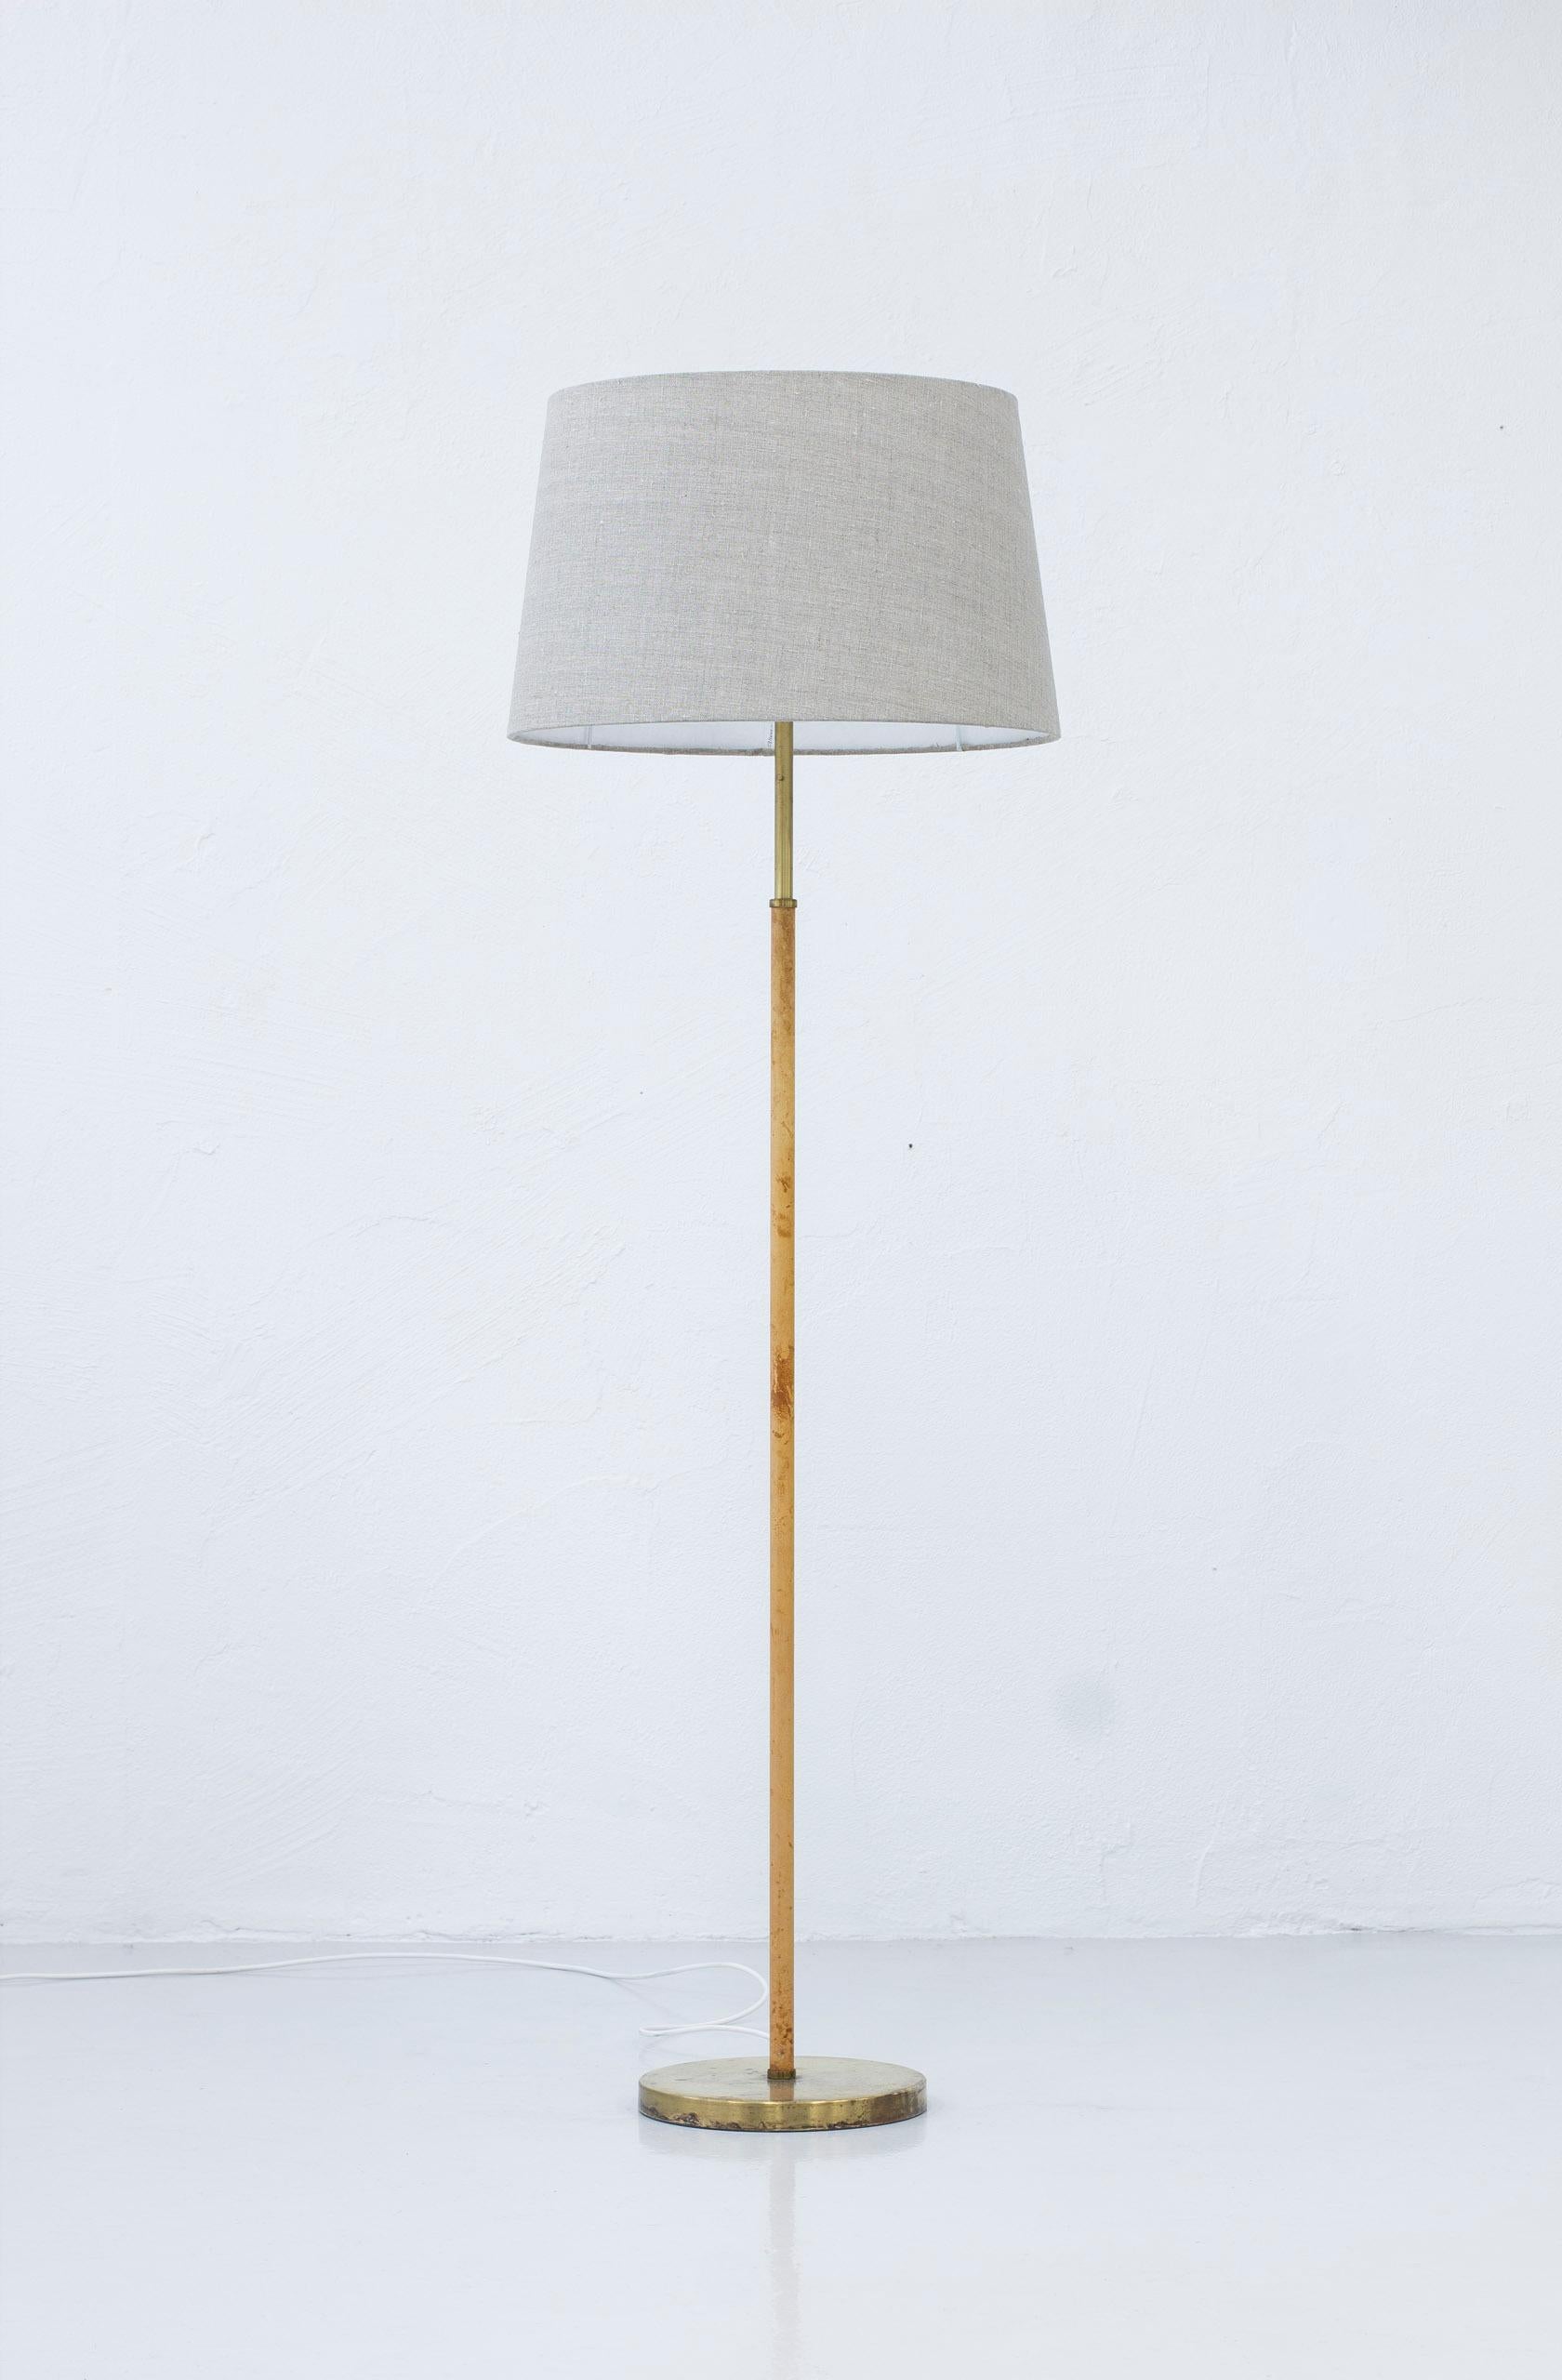 Floor lamp model 588 G designed by Anders Pehrson for Ateljé Lyktan. Produced in Sweden during the 1960s. Made from brass with original leather on the stem. Original shade with acrylic diffusers. The shade has been reupholstered in grey linen